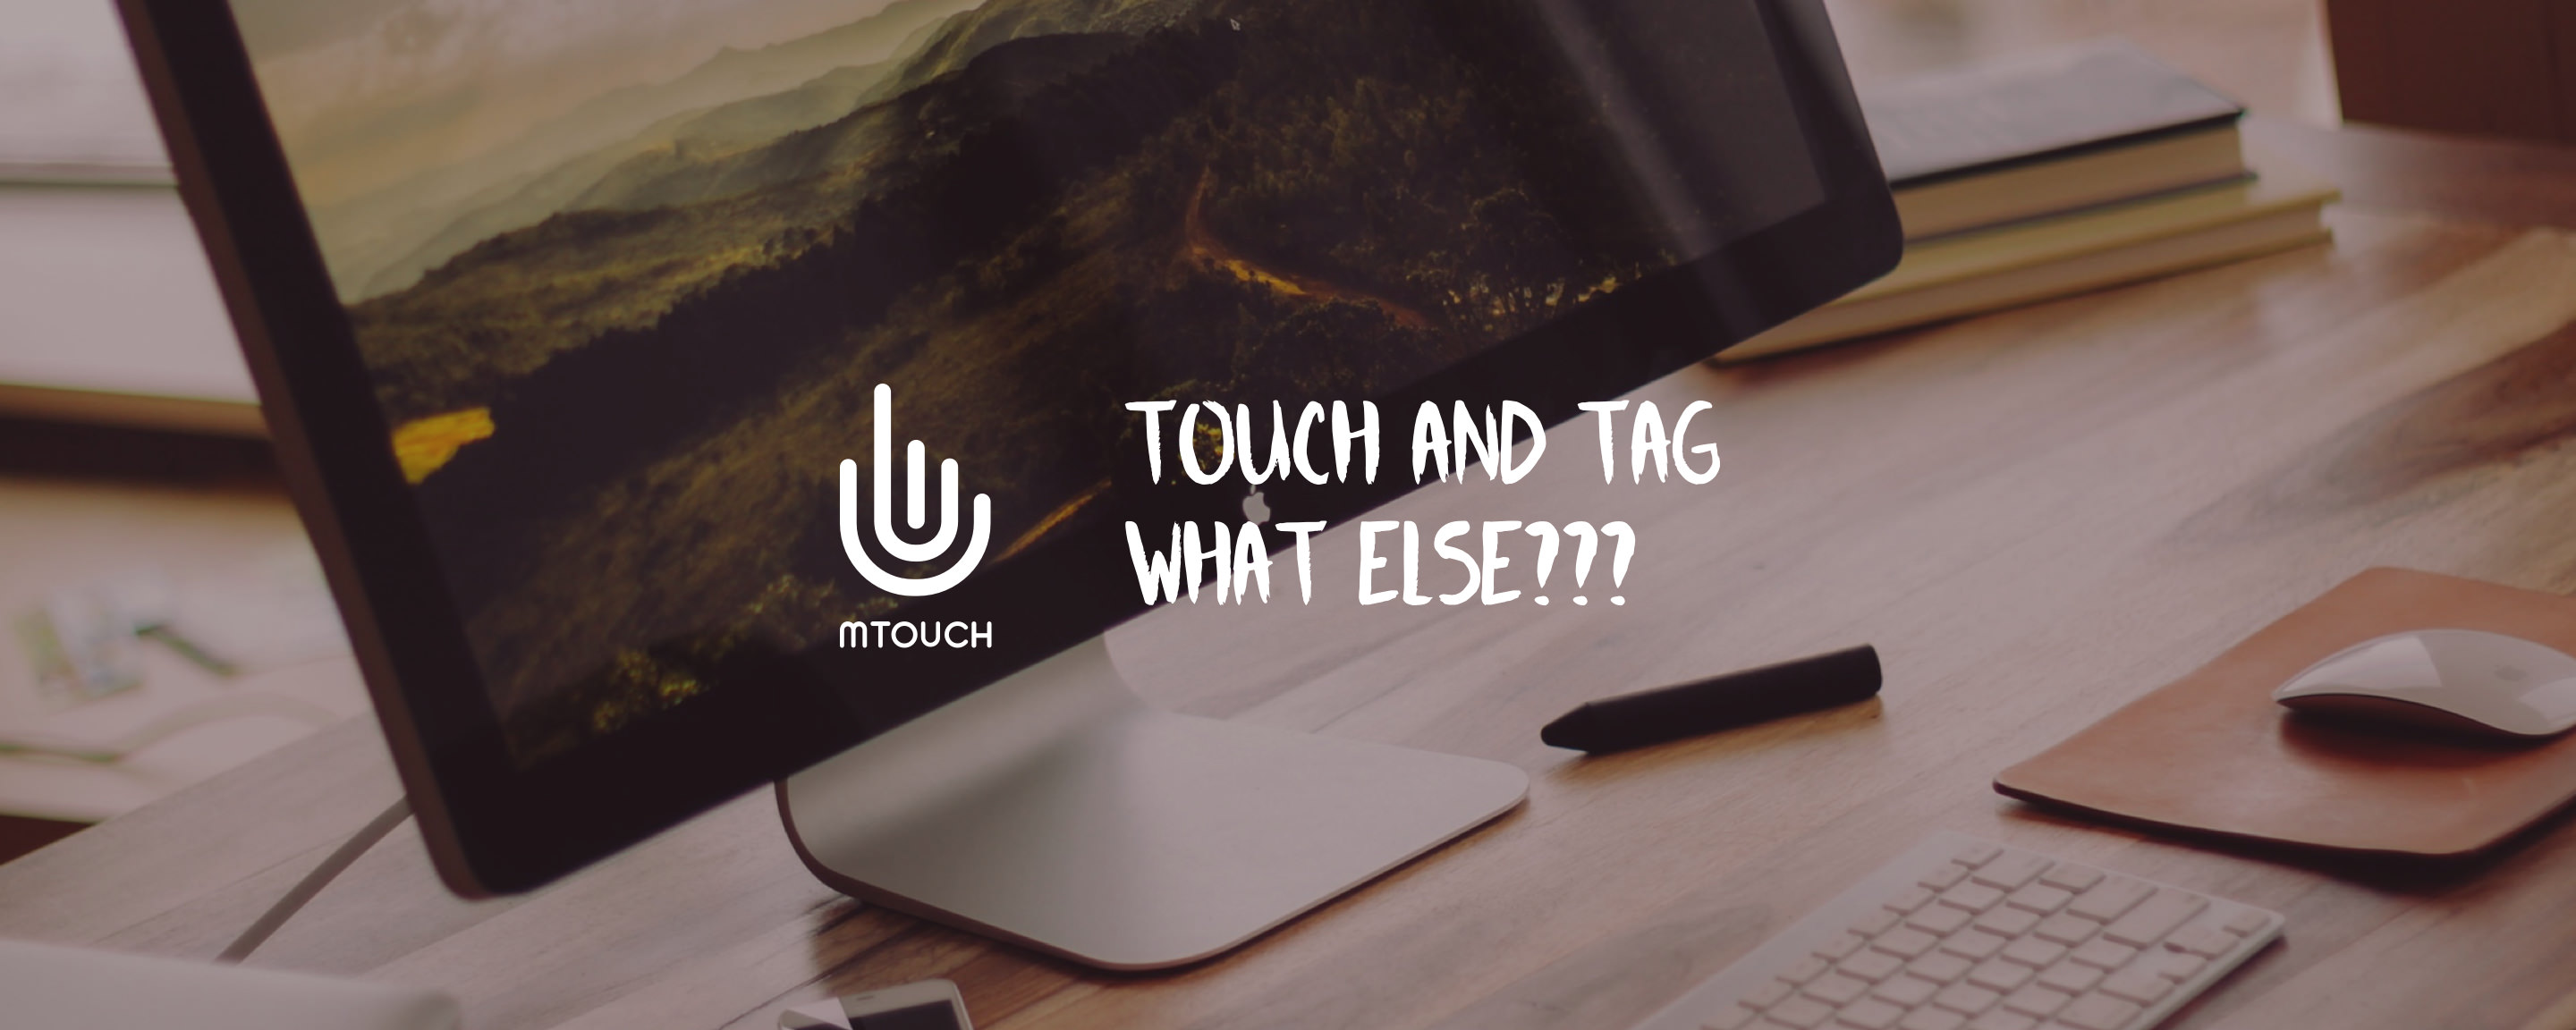 mtouch touch and tag what else??